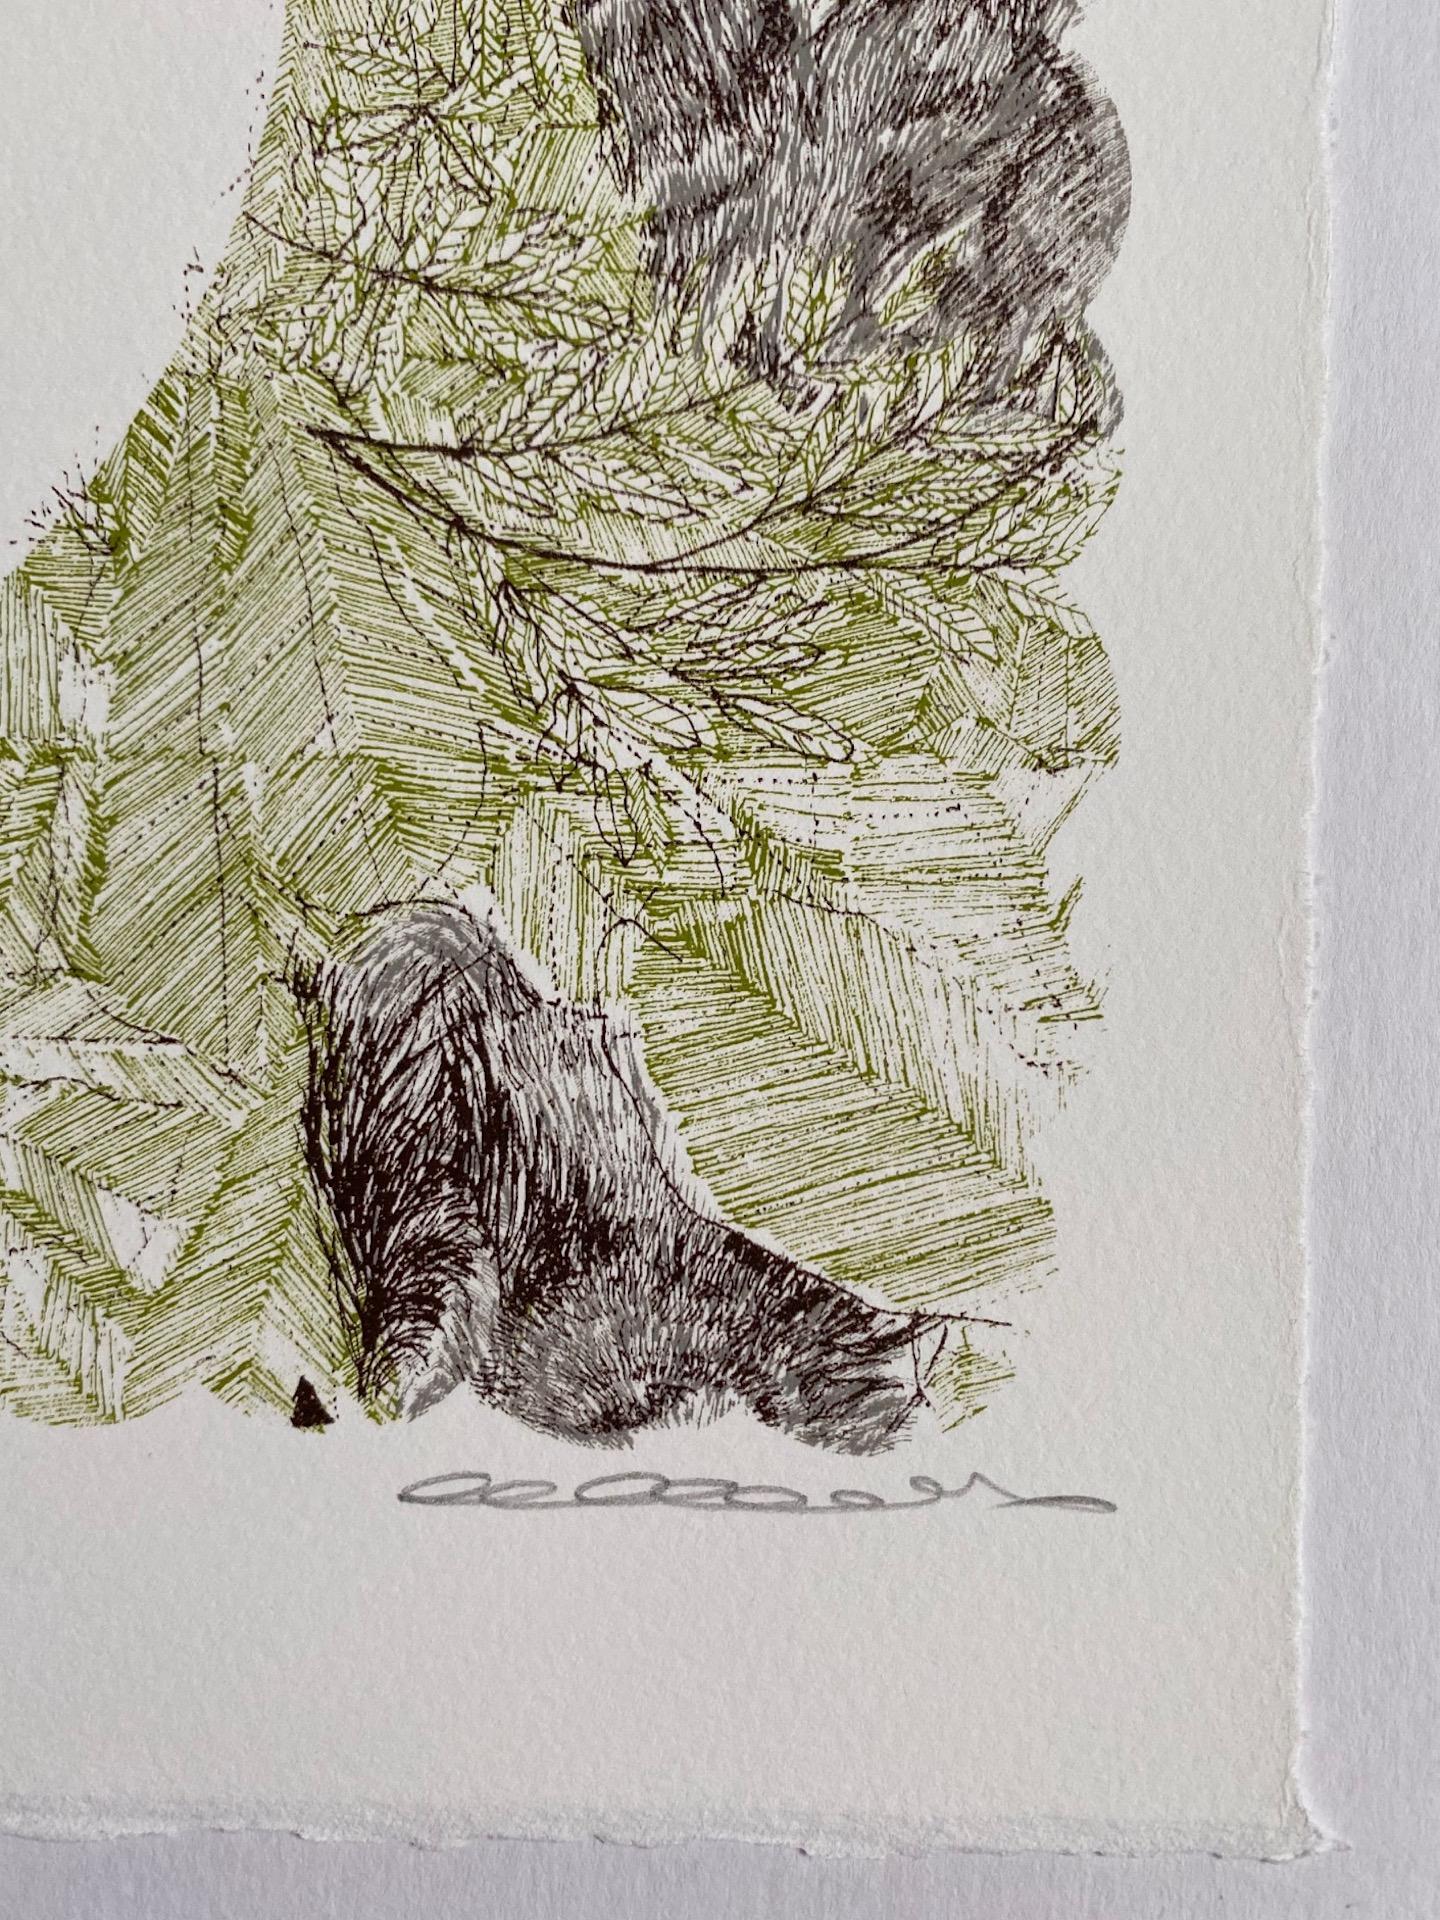 Clare Halifax
S is for Sloth
Limited Edition 3 colour screen print
Edition of 100
Sheet Size: H 38cm x W 37cm x 0.1cm
Sold Unframed
Hand printed by the artist onto somerset satin paper 300gms with deckle edge.
Please Note that in situ images are